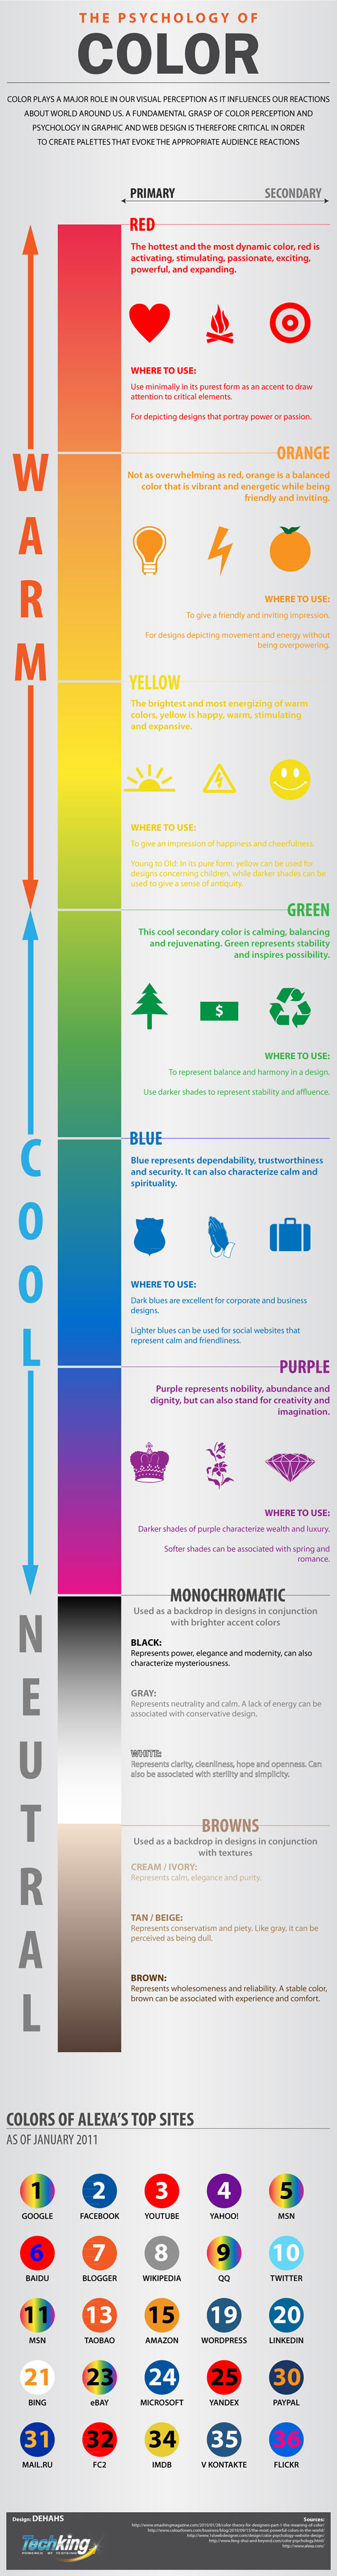 Infographic: The Psychology of Color